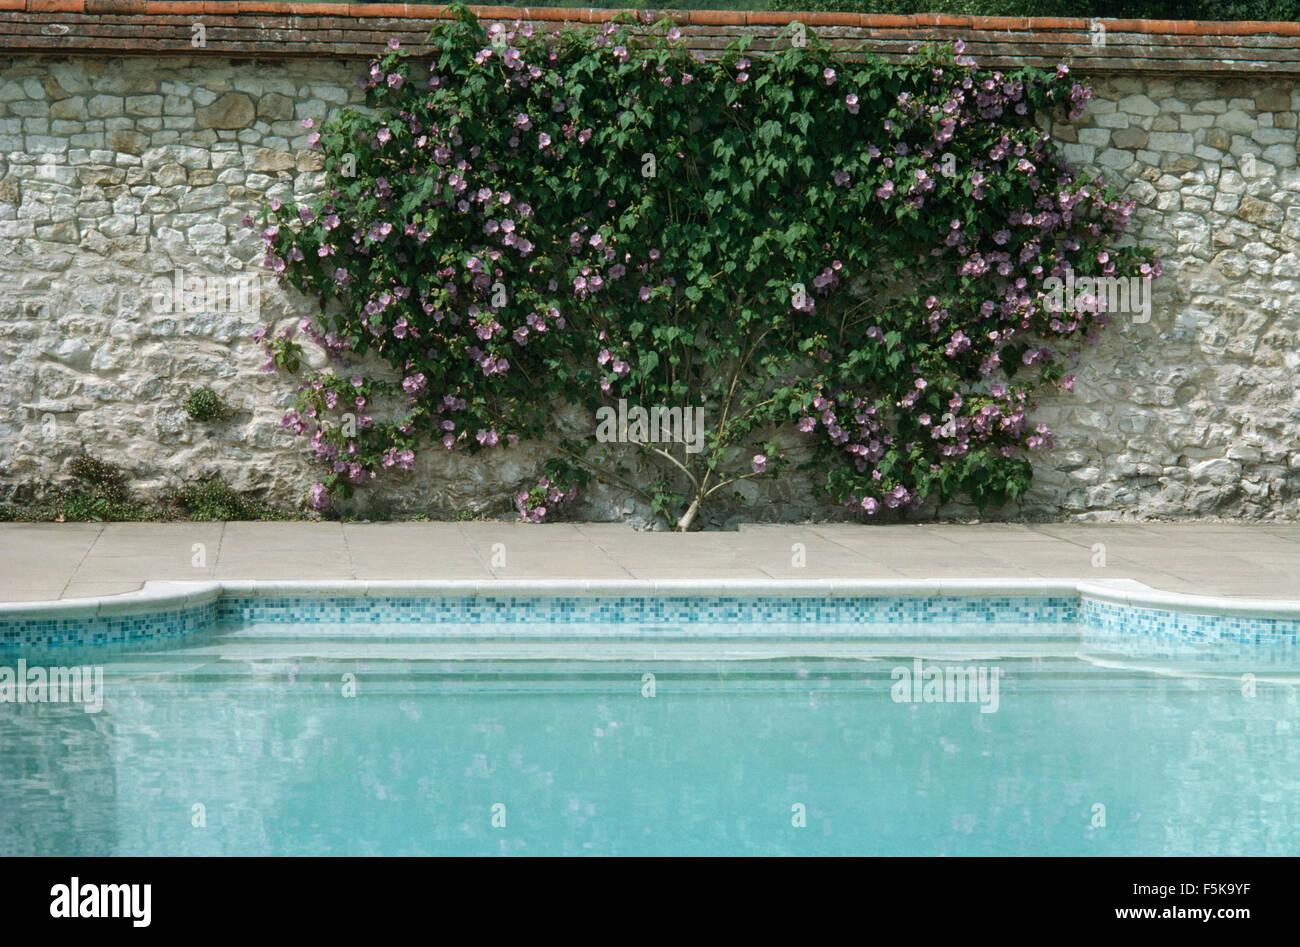 Purple clematis on stone wall enclosing a turquoise swimming pool in a country garden Stock Photo